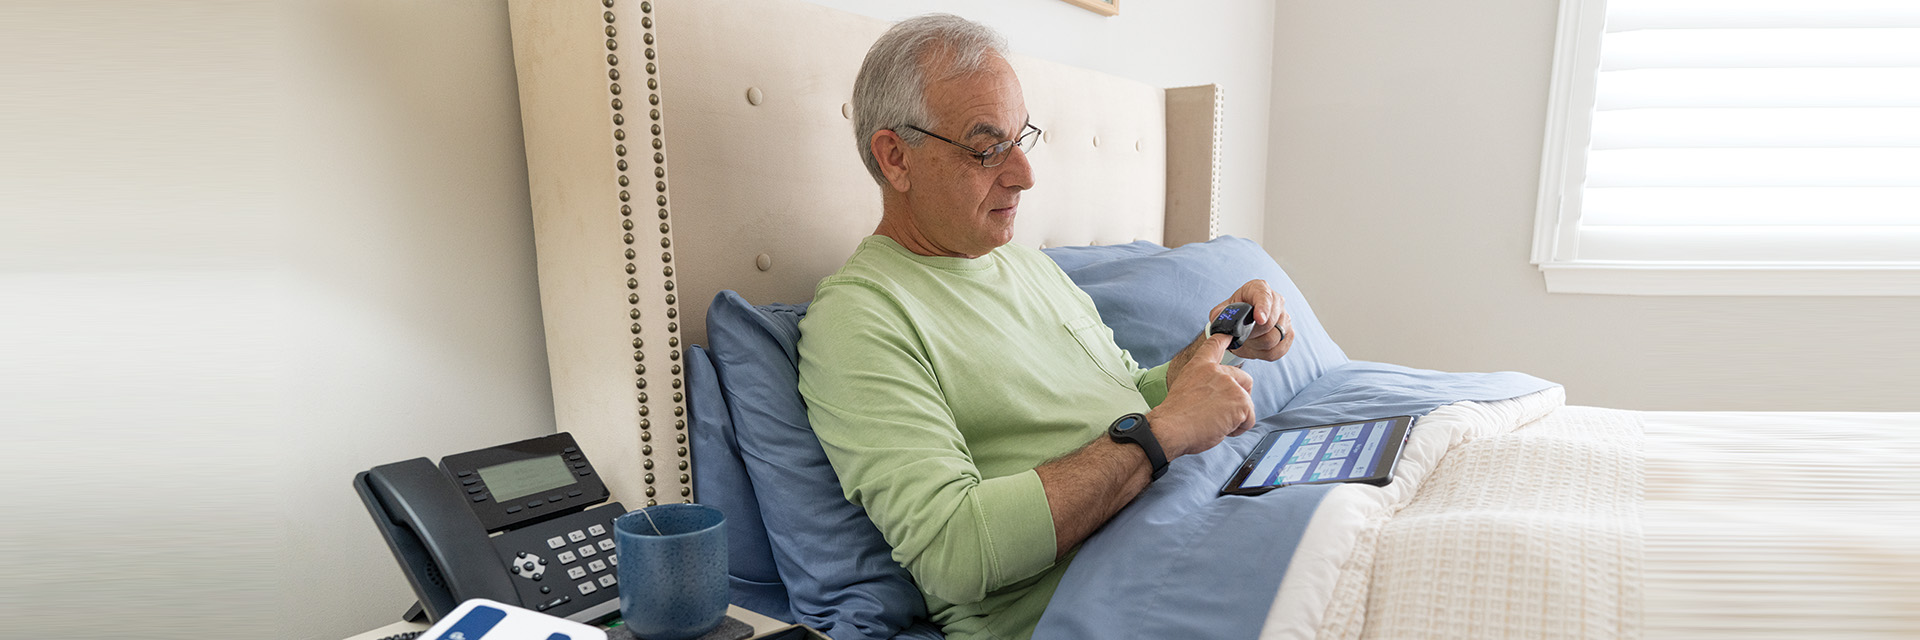 Man on bed with tablet